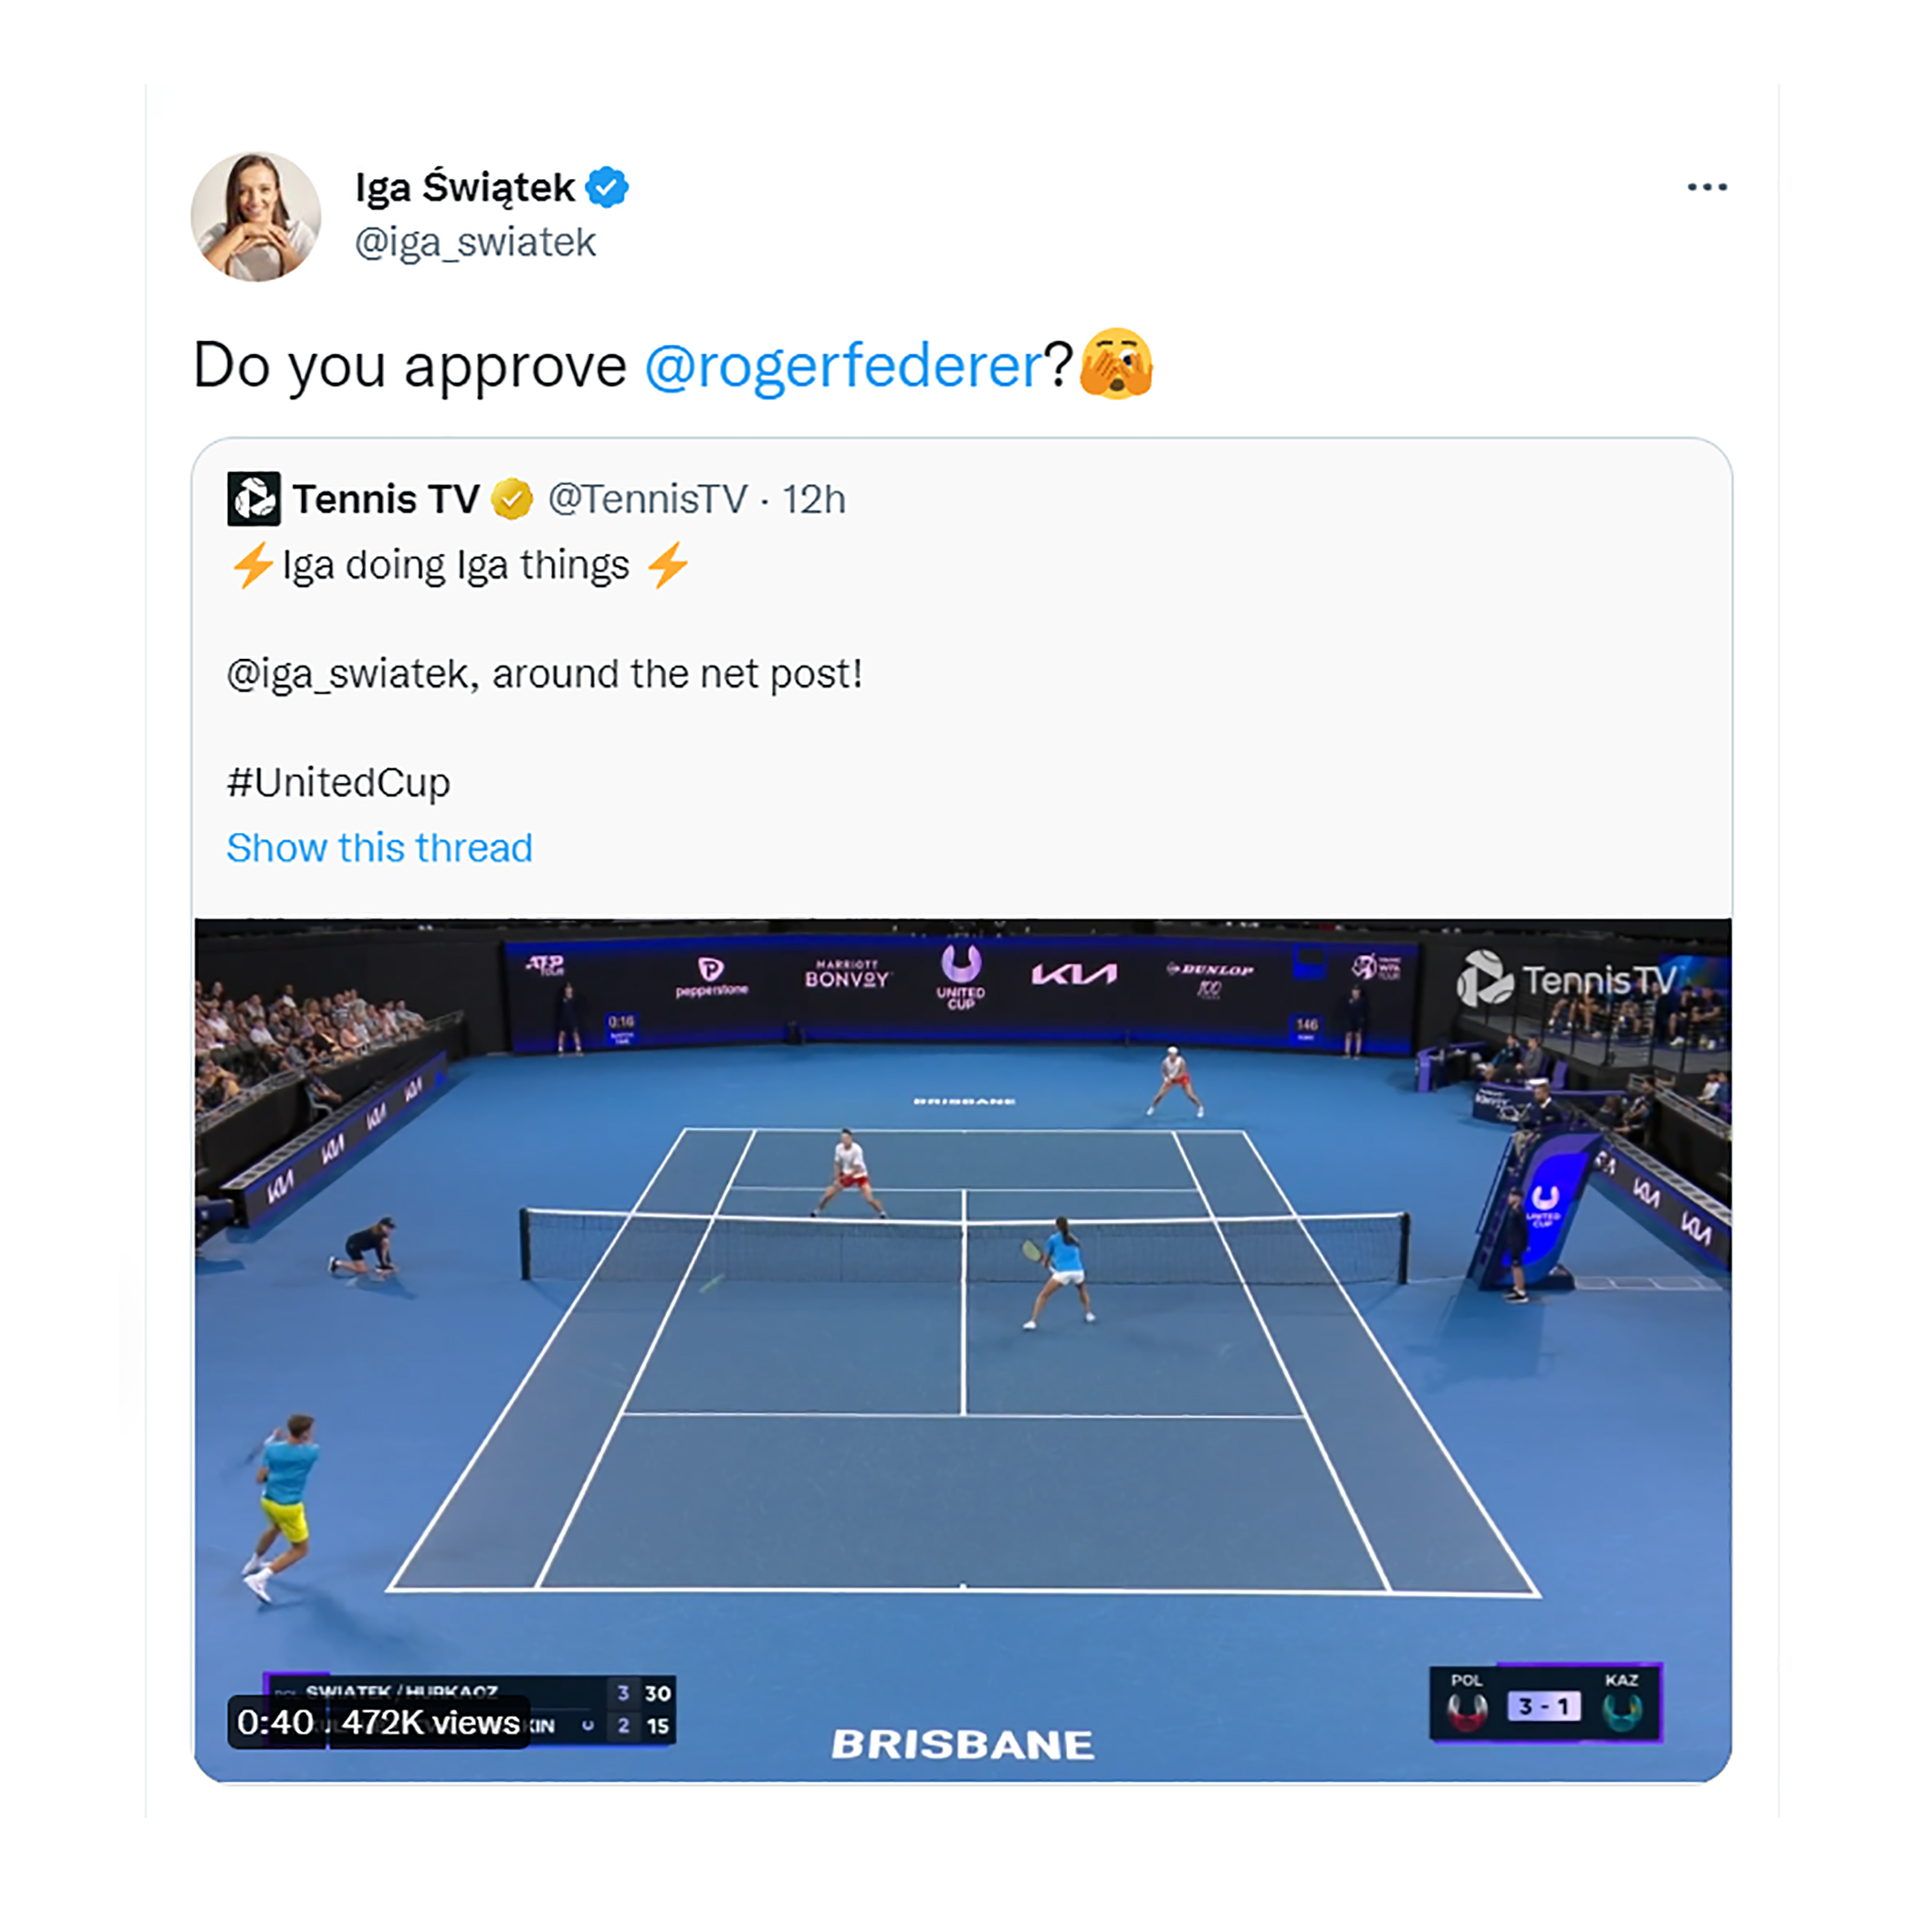 "Do you approve, Roger?"wrote the Polish woman on Twitter